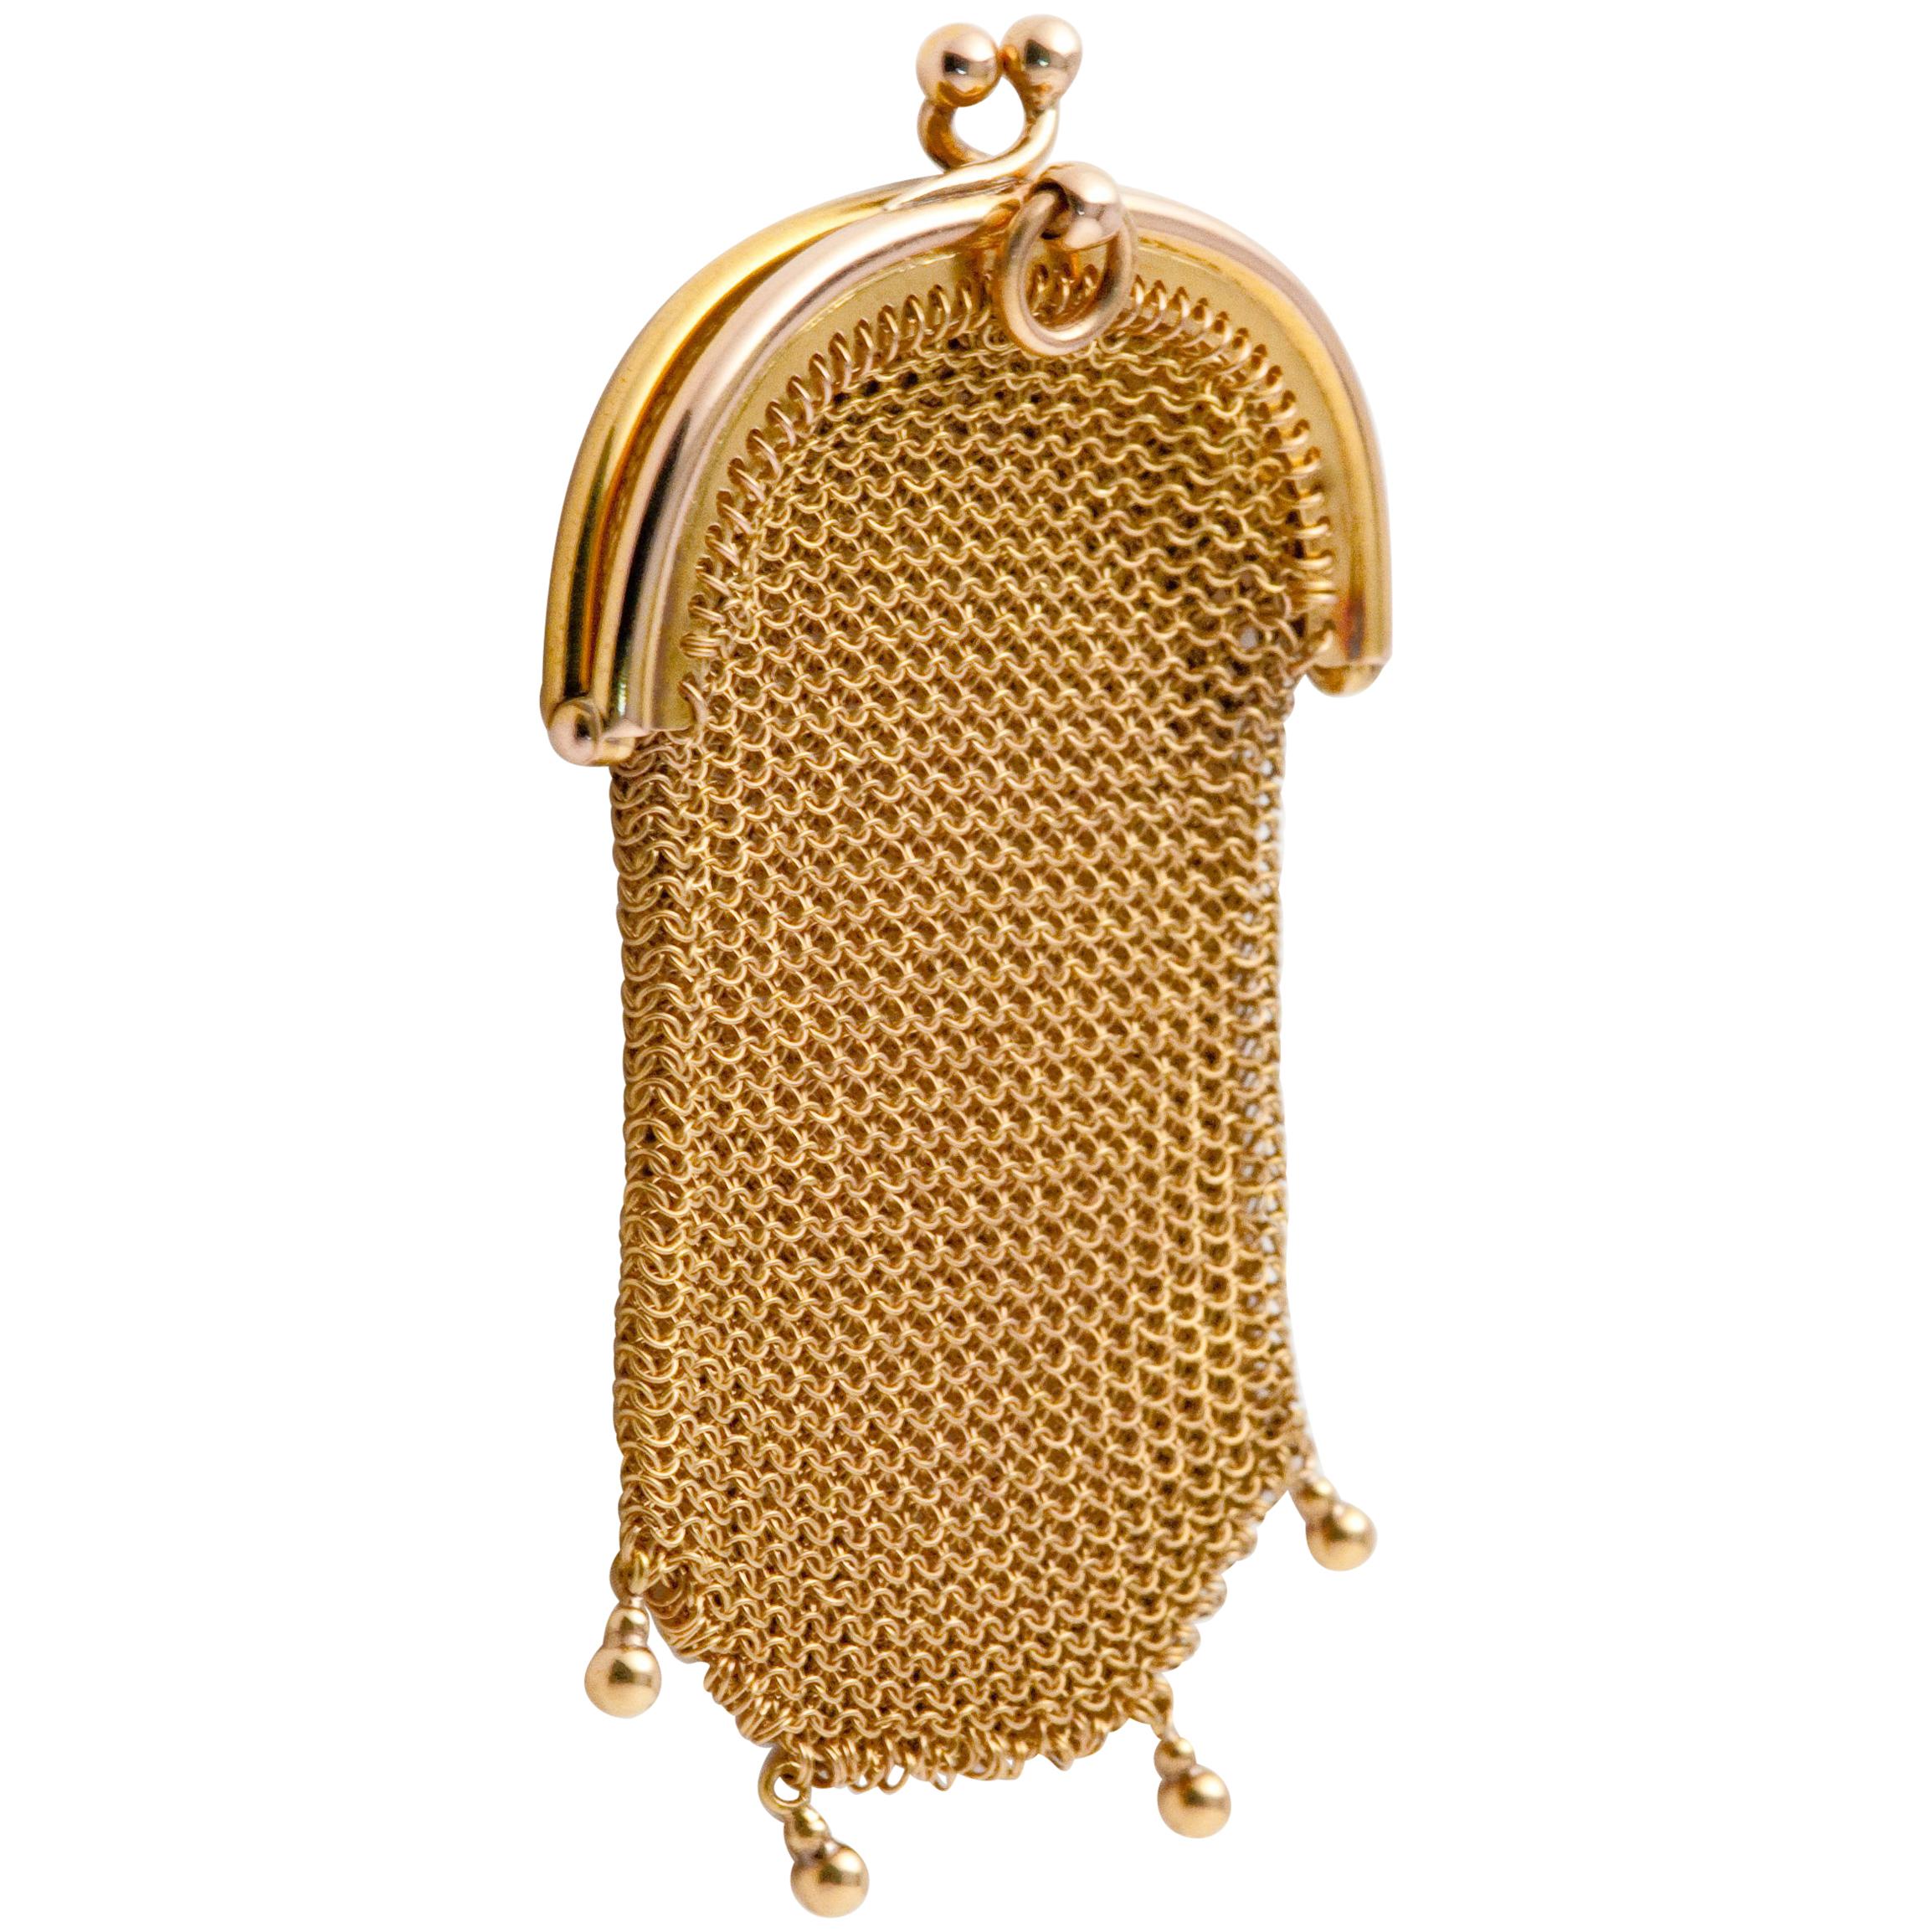 Gold Minaudiere, 18 Carat from Another Era